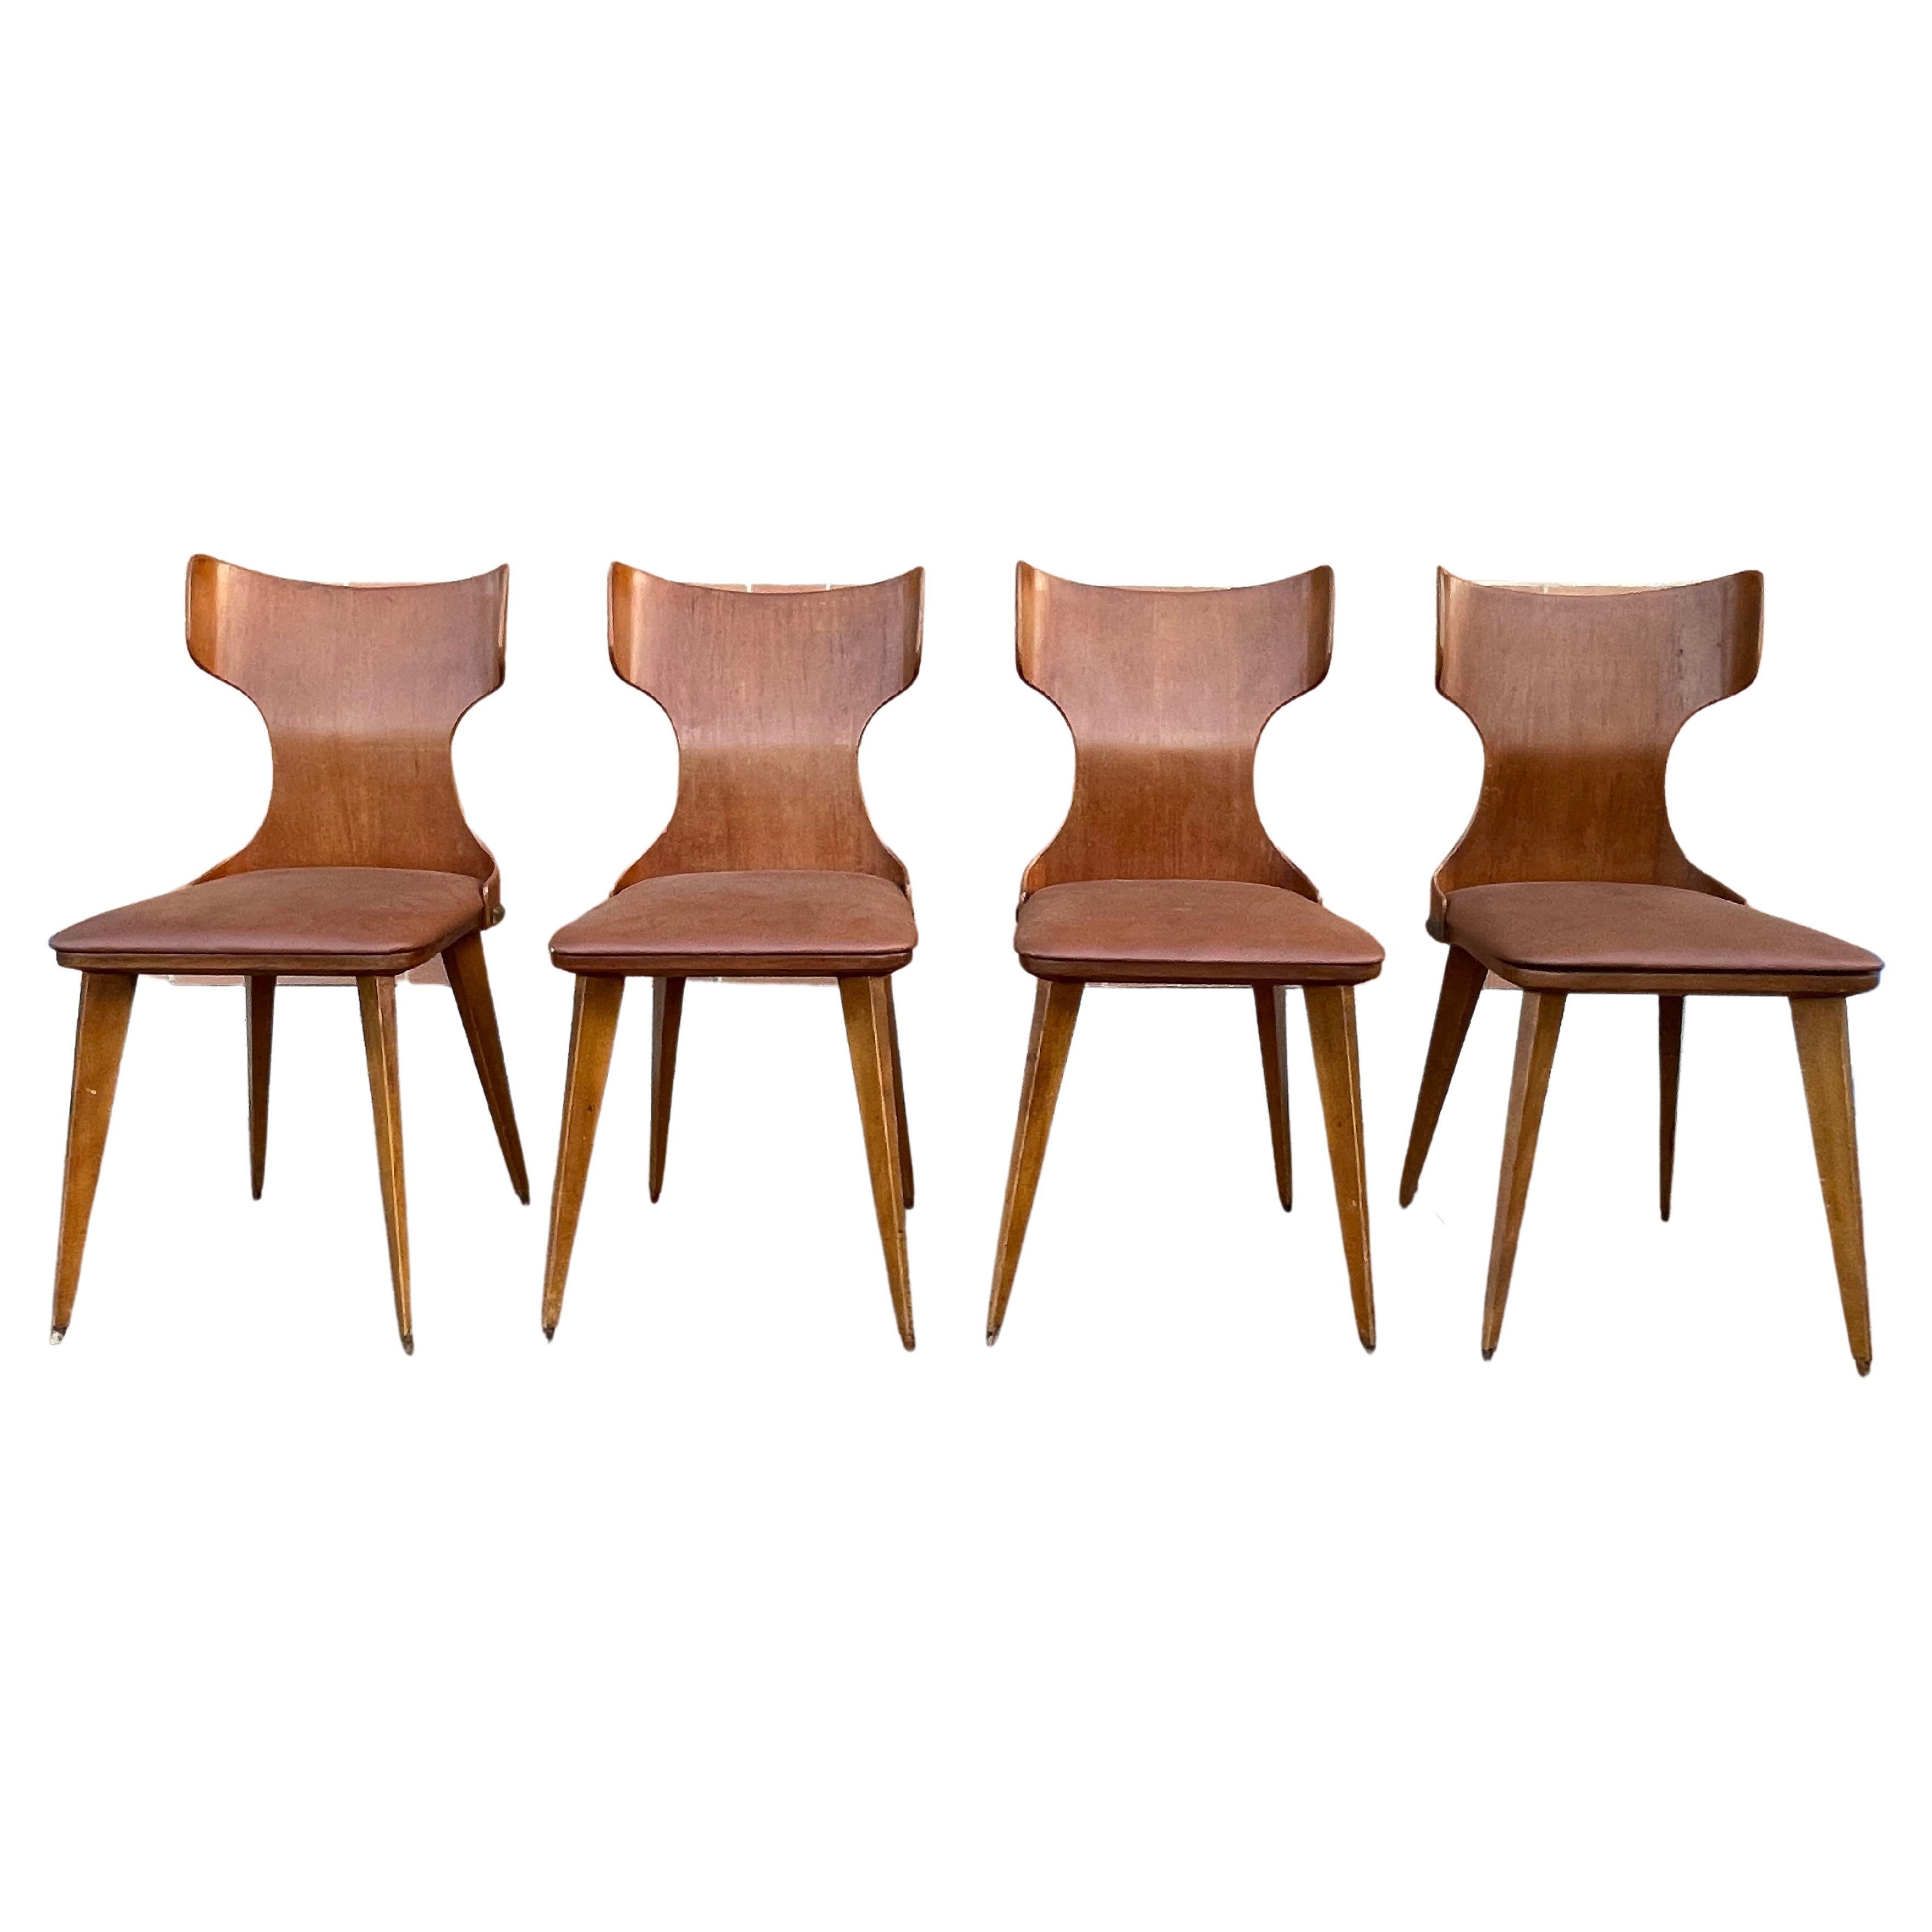 Set of 4 curved chairs by Carlo Ratti, 50s, Italy